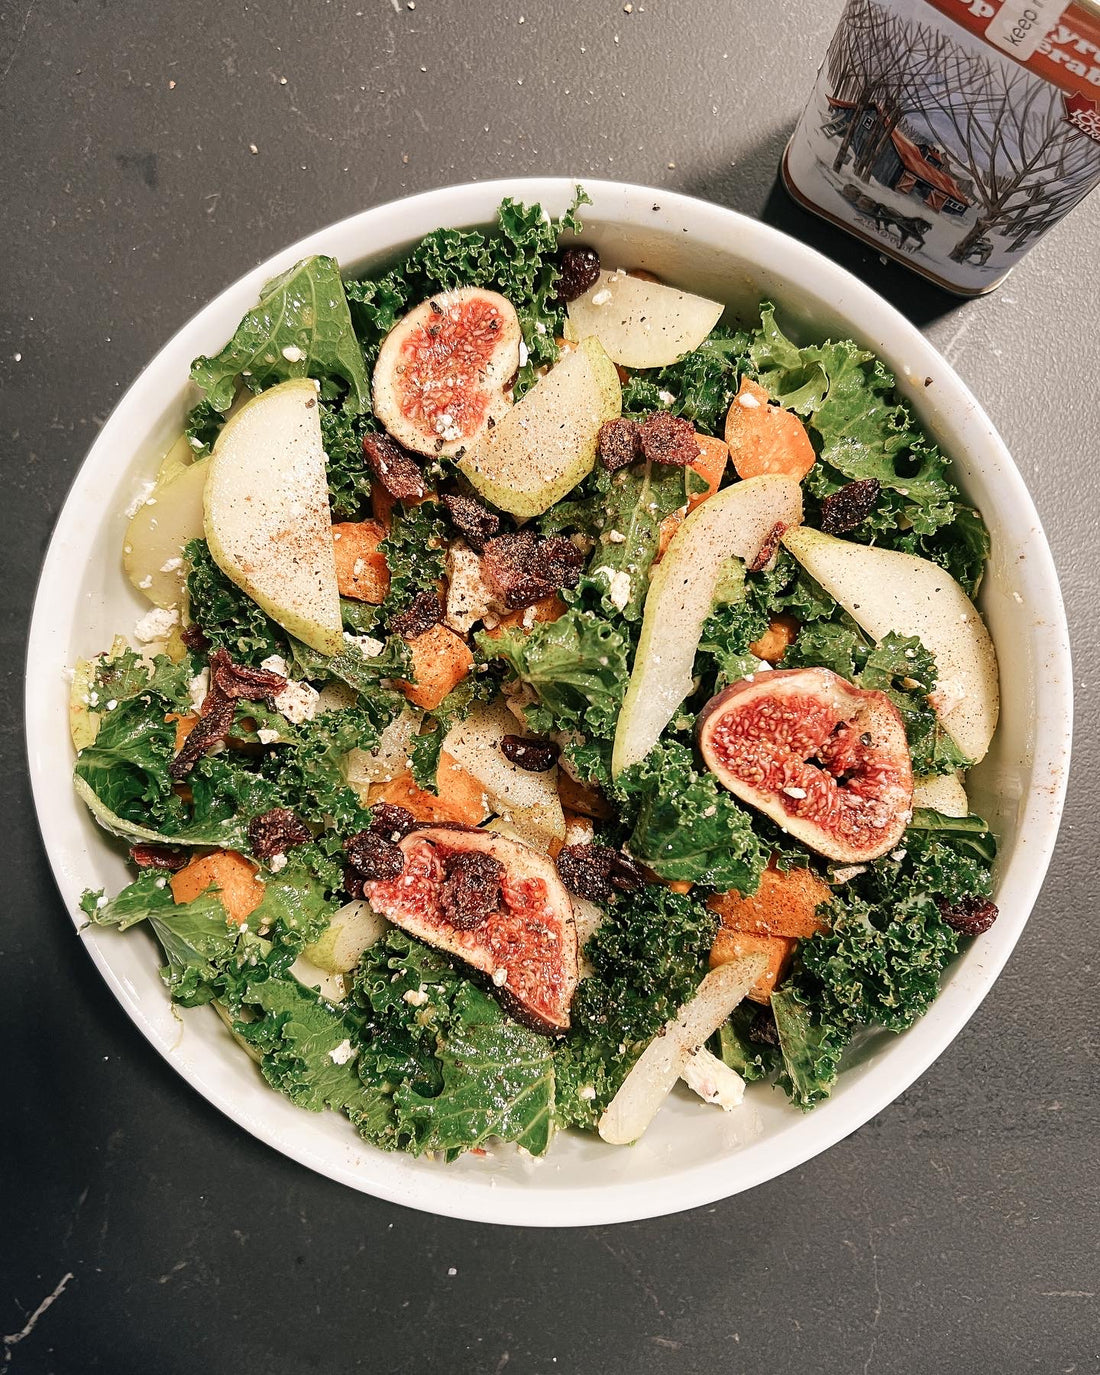 maple syrup tin and kale salad with pears, sweet potatoes, and maple dressing